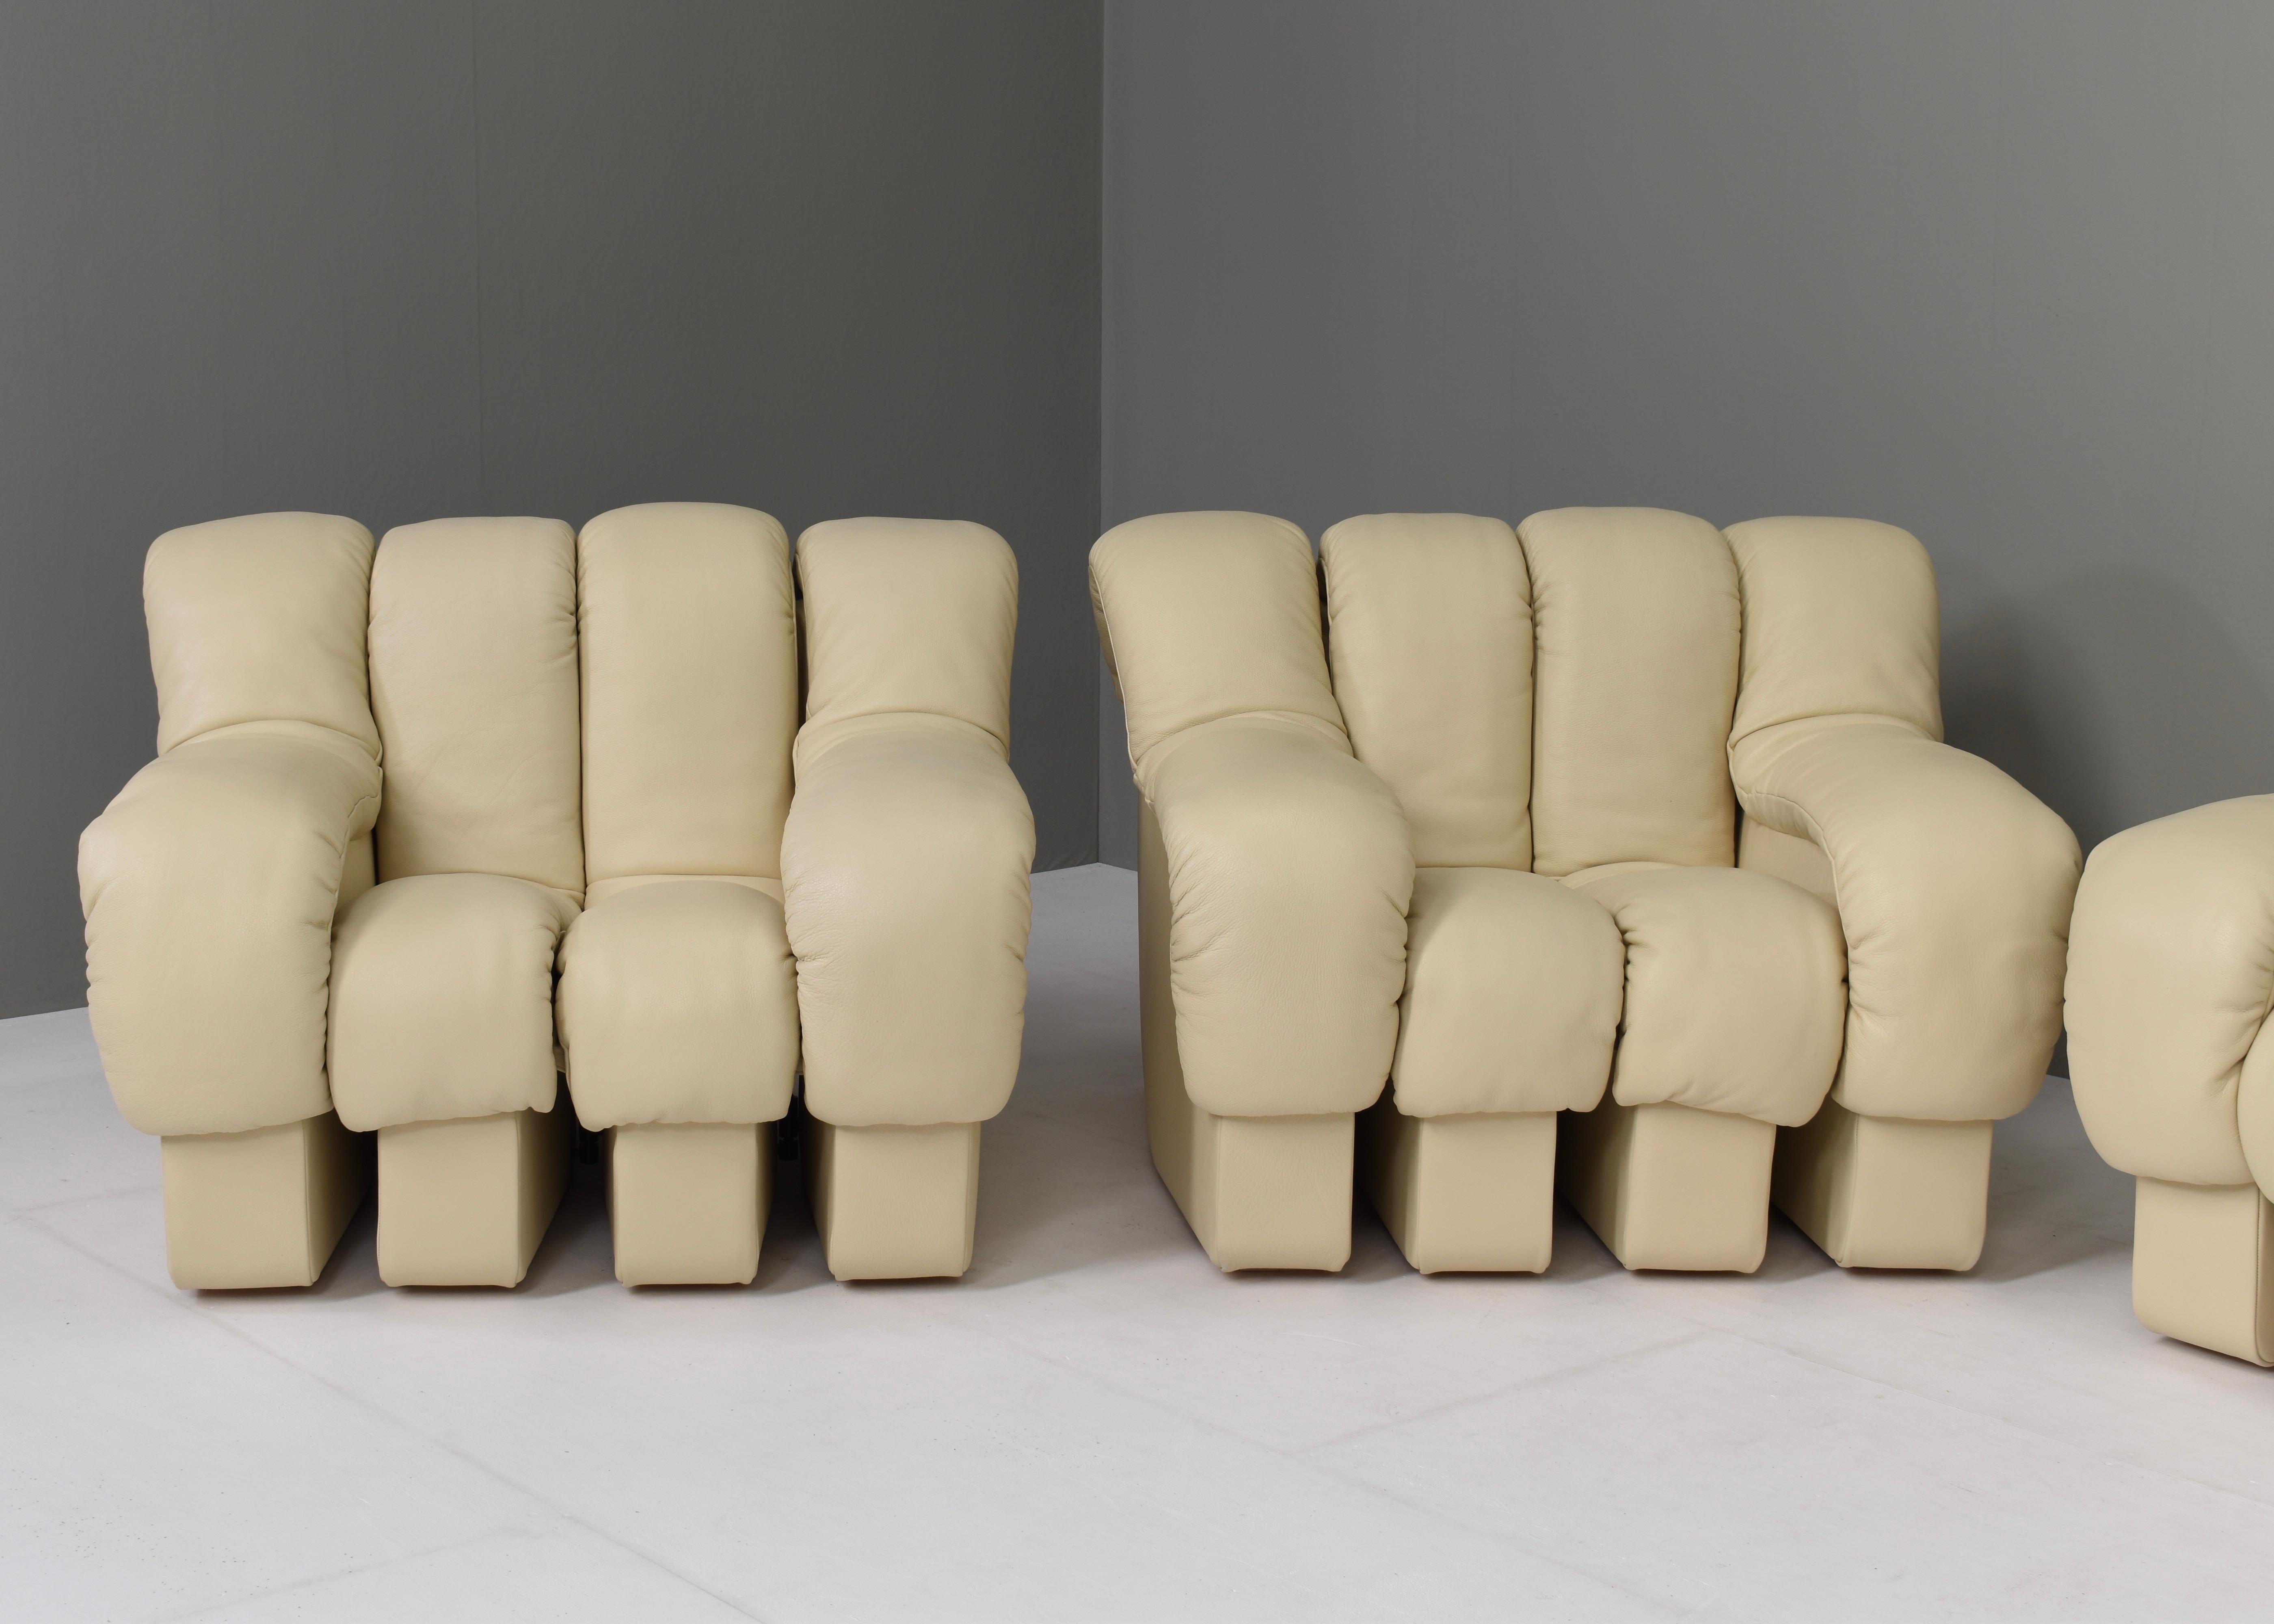 26 Pieces Ds600 Sectional Sofa and Chairs by De Sede in Crème Leather 1